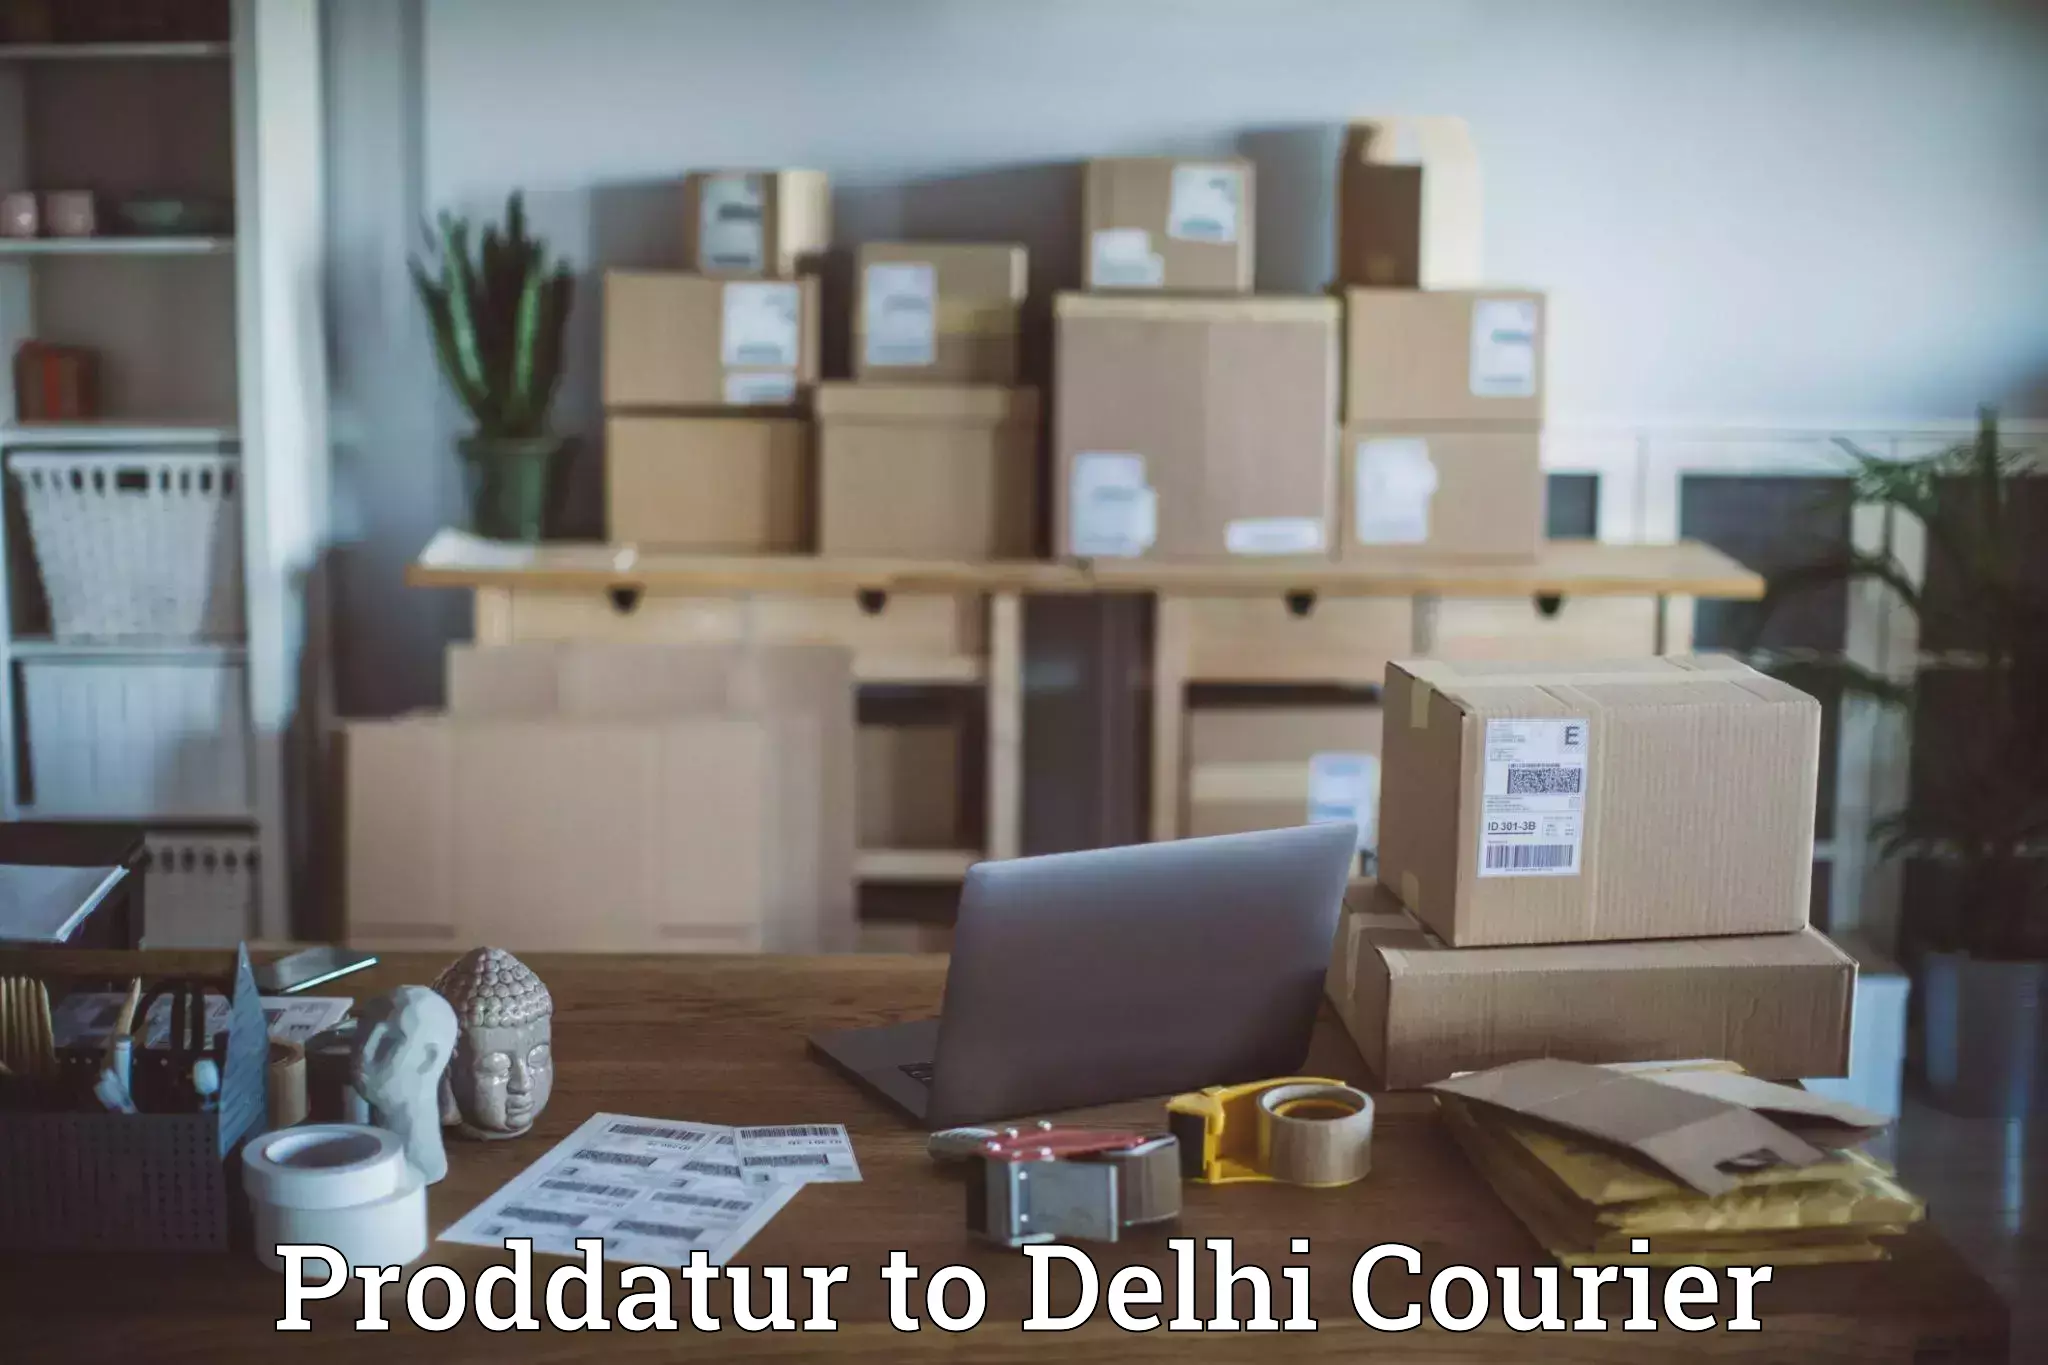 Budget-friendly shipping Proddatur to Lodhi Road